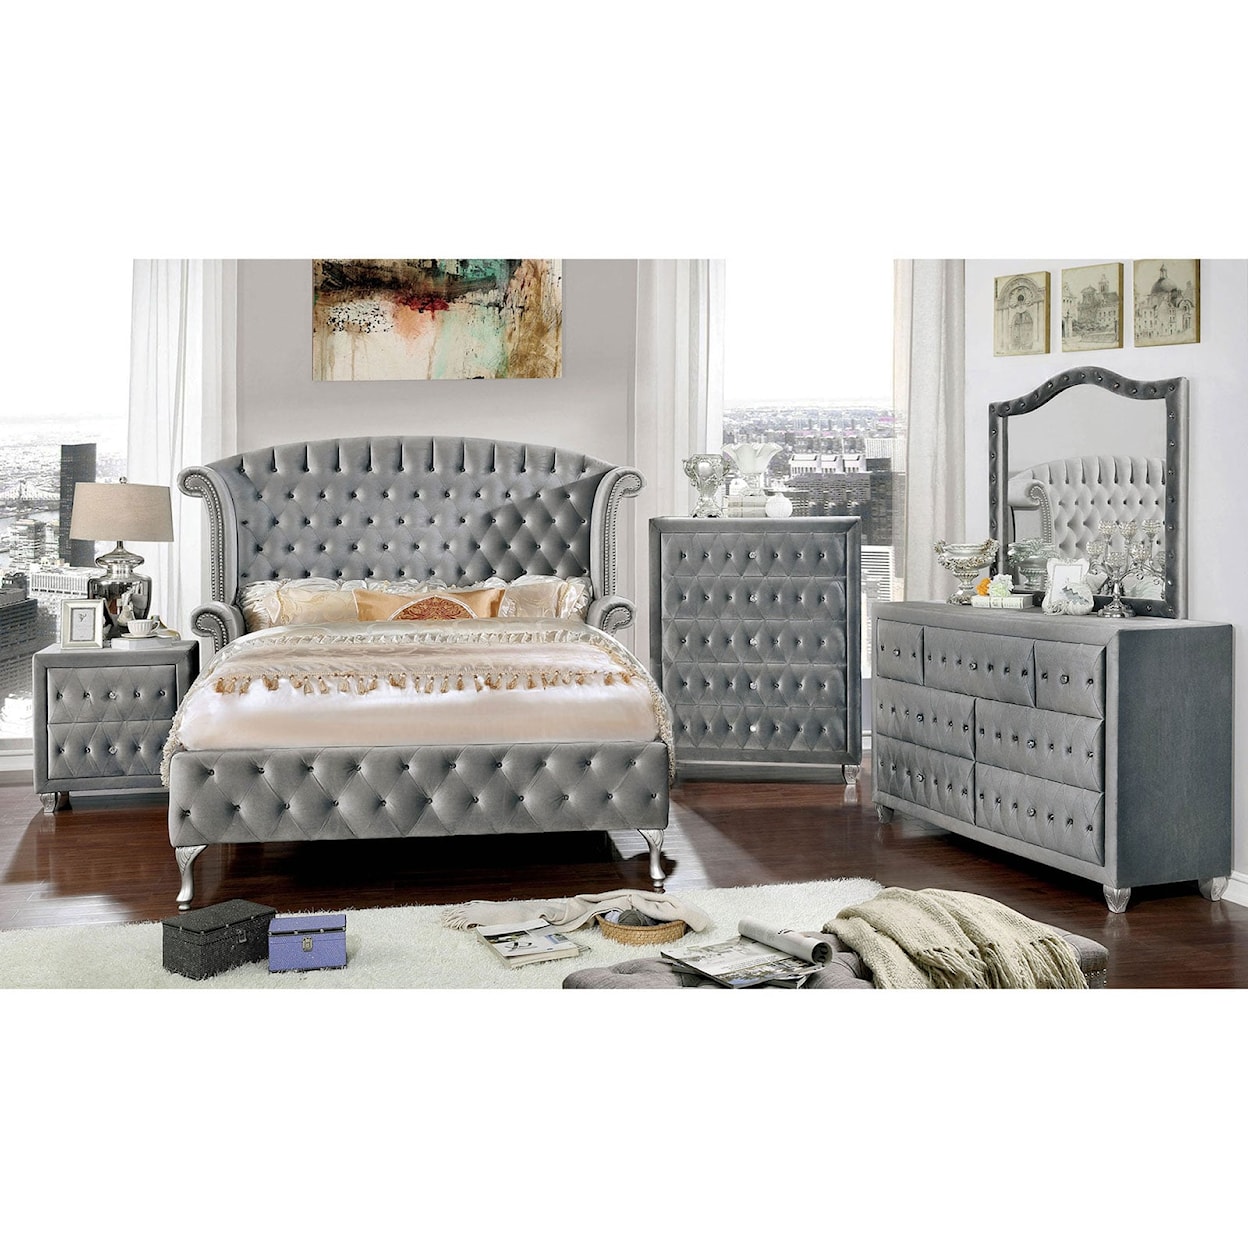 Furniture of America Alzir 5 Pc. Queen Bedroom Set w/ Chest